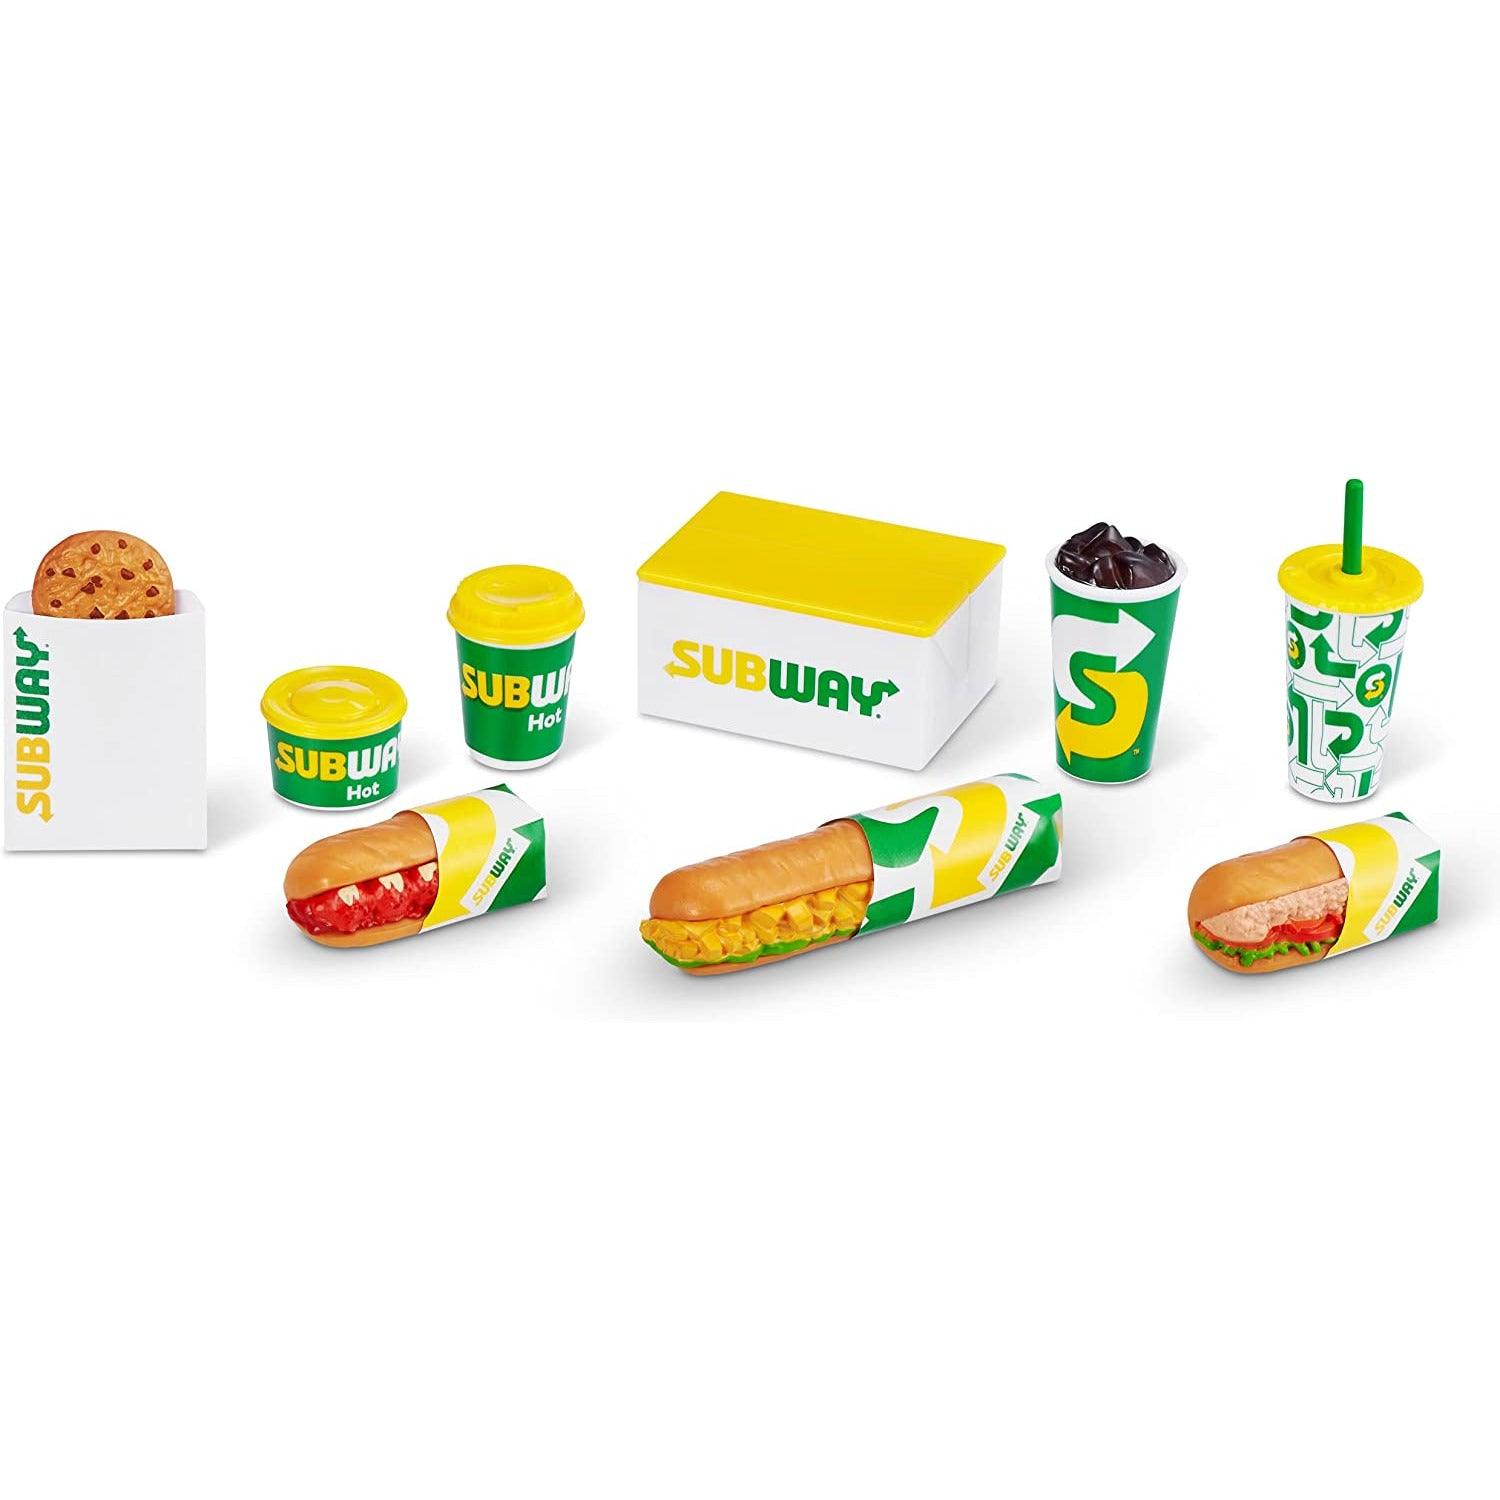 5 Surprise Foodie Mini Brands by ZURU, Mystery Capsule Real Miniature Brands Collectibles, Fast Food Toys and Shopping Accessories - BumbleToys - 5-7 Years, 8-13 Years, collectible, collectors, Girls, Miniature Dolls & Accessories, OXE, Pre-Order